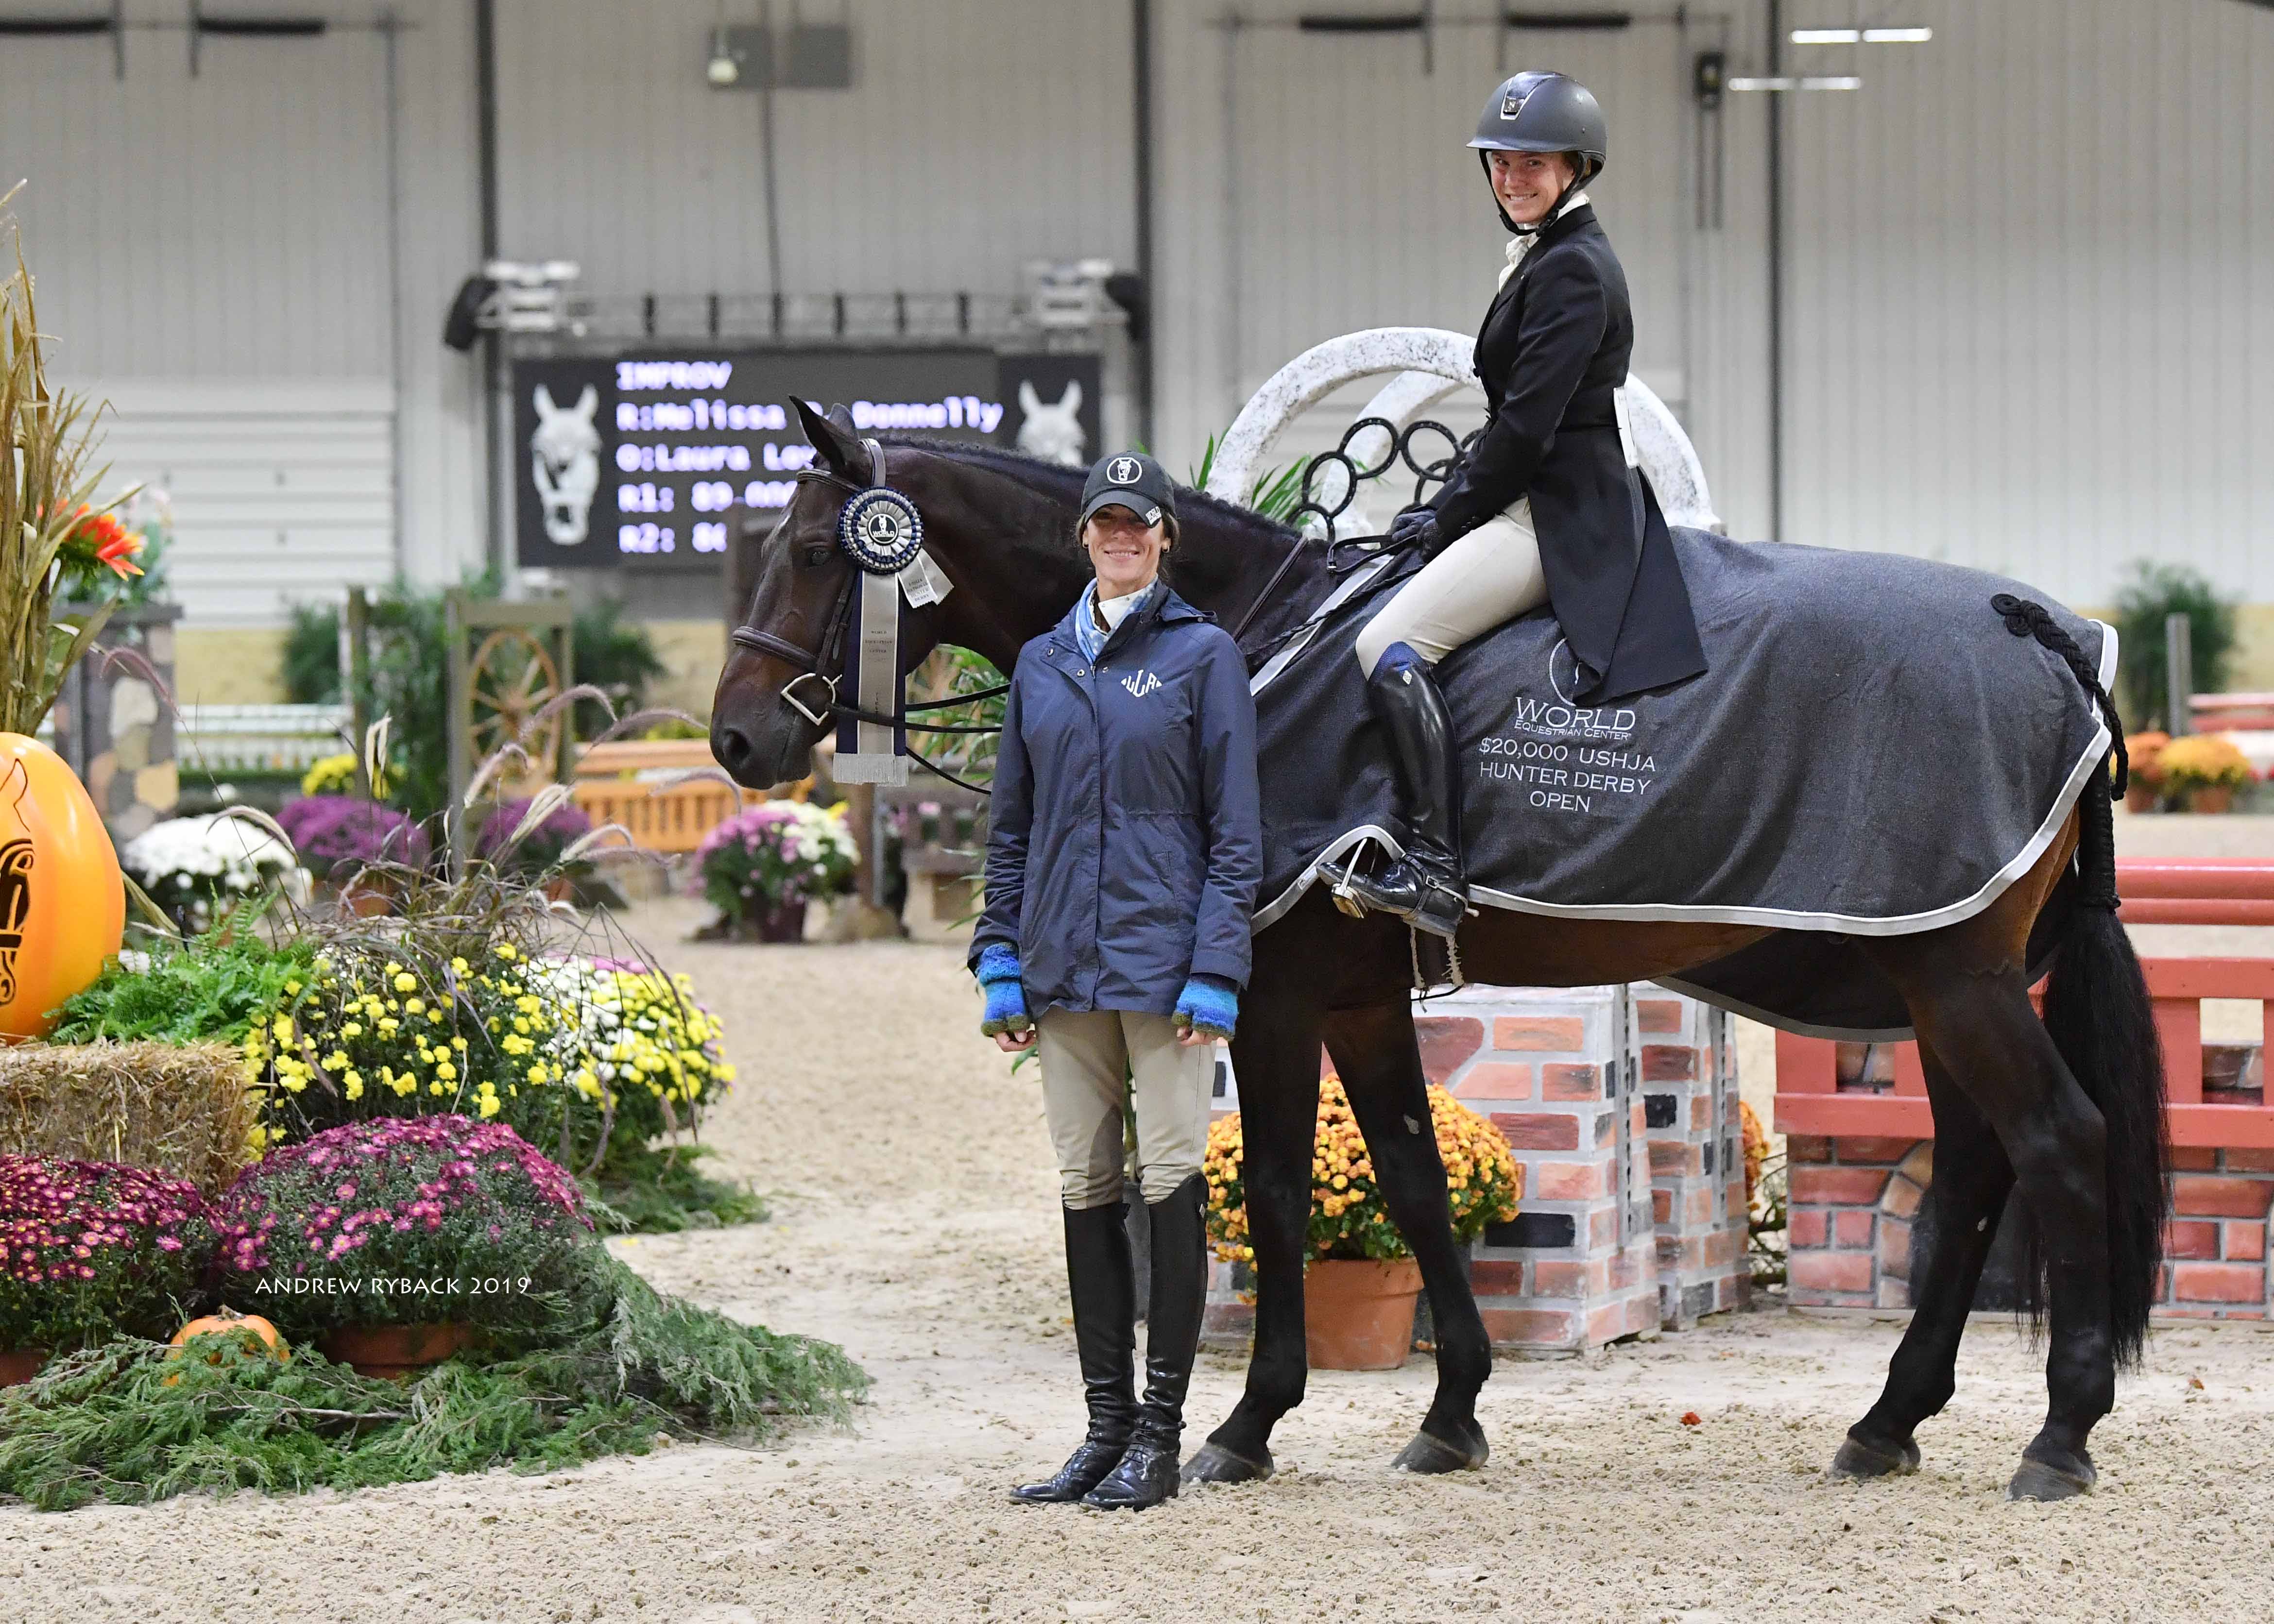 Greg Crolick and Corallo Z in USHJA $40,000 Derby Top Equestrian Honors International Center - Hunter Take the World